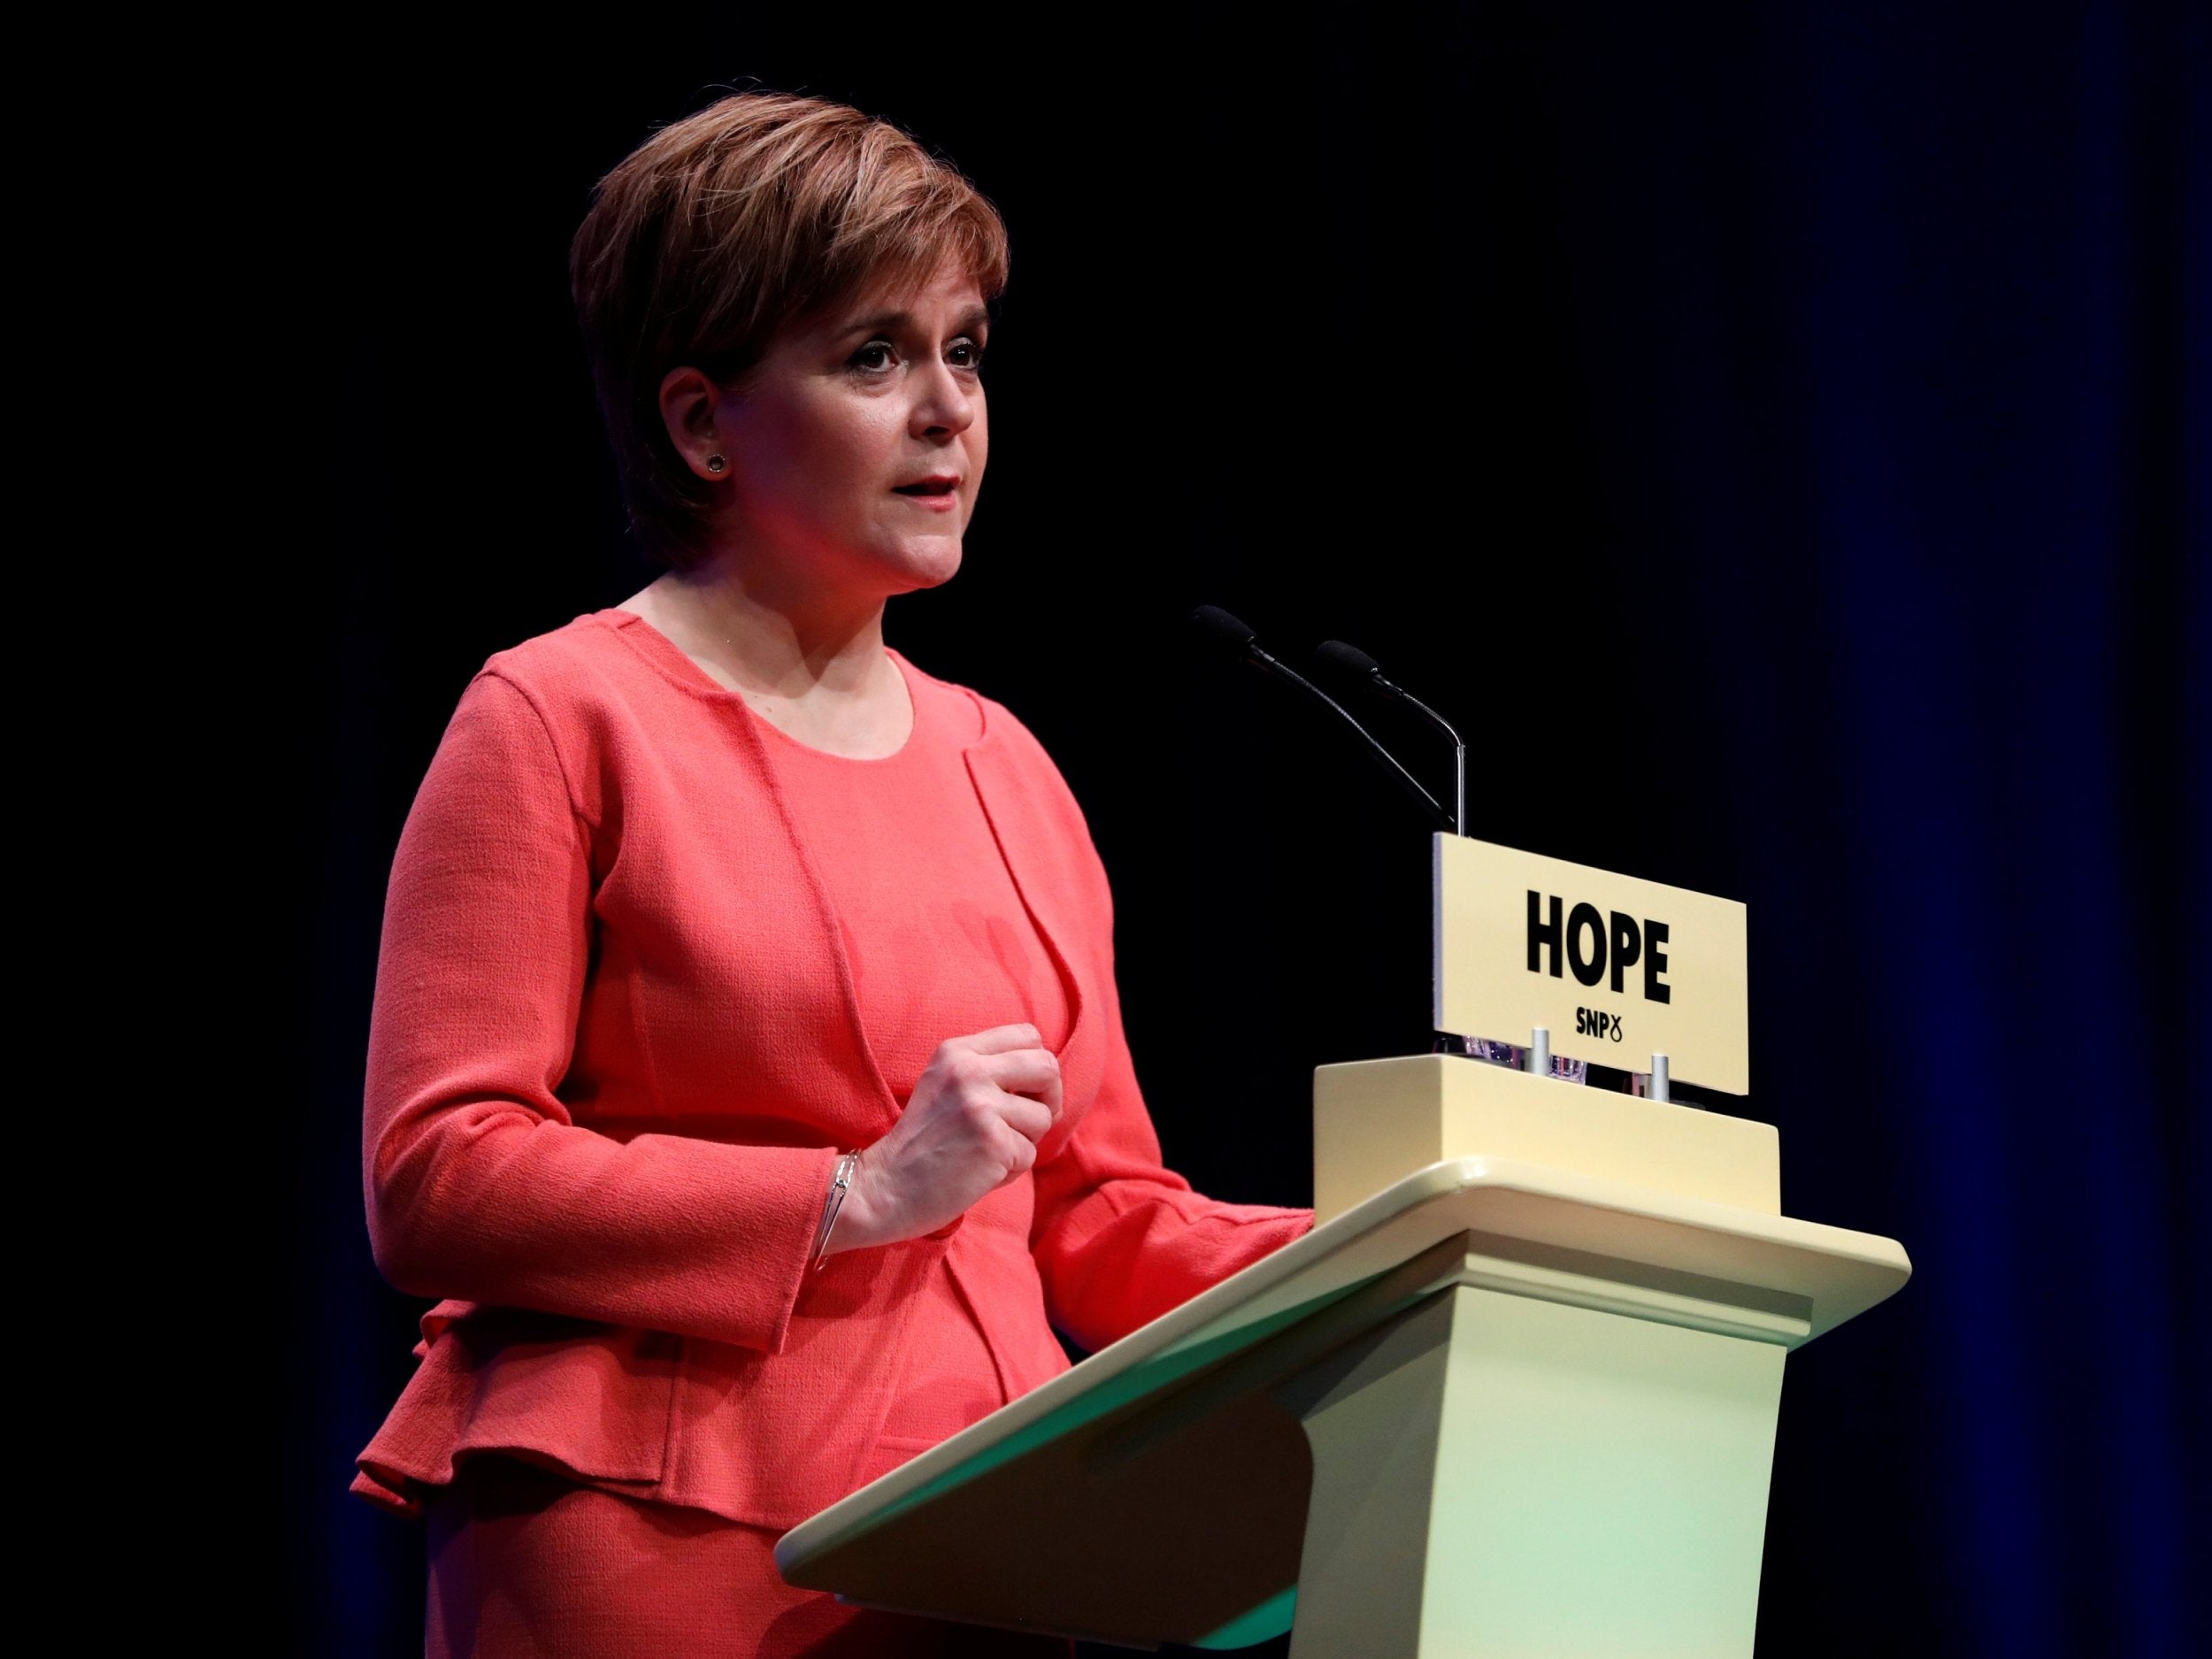 Brexit: Nicola Sturgeon calls on PM for Norway-style deal as &apos;democratic compromise&apos;